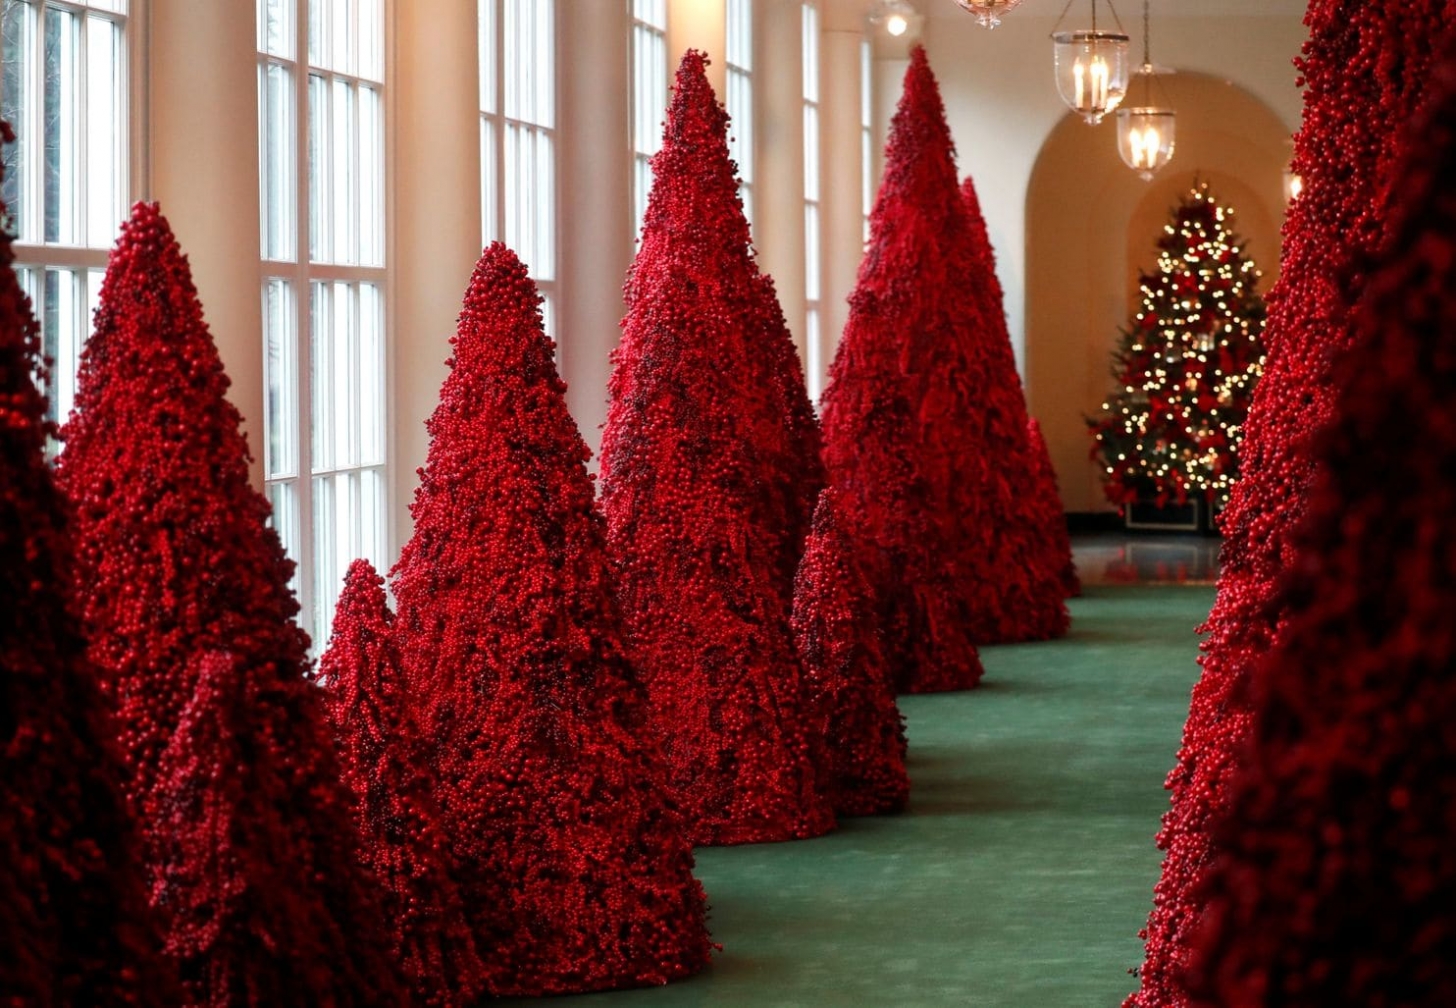 A Very Red Whitehouse Christmas